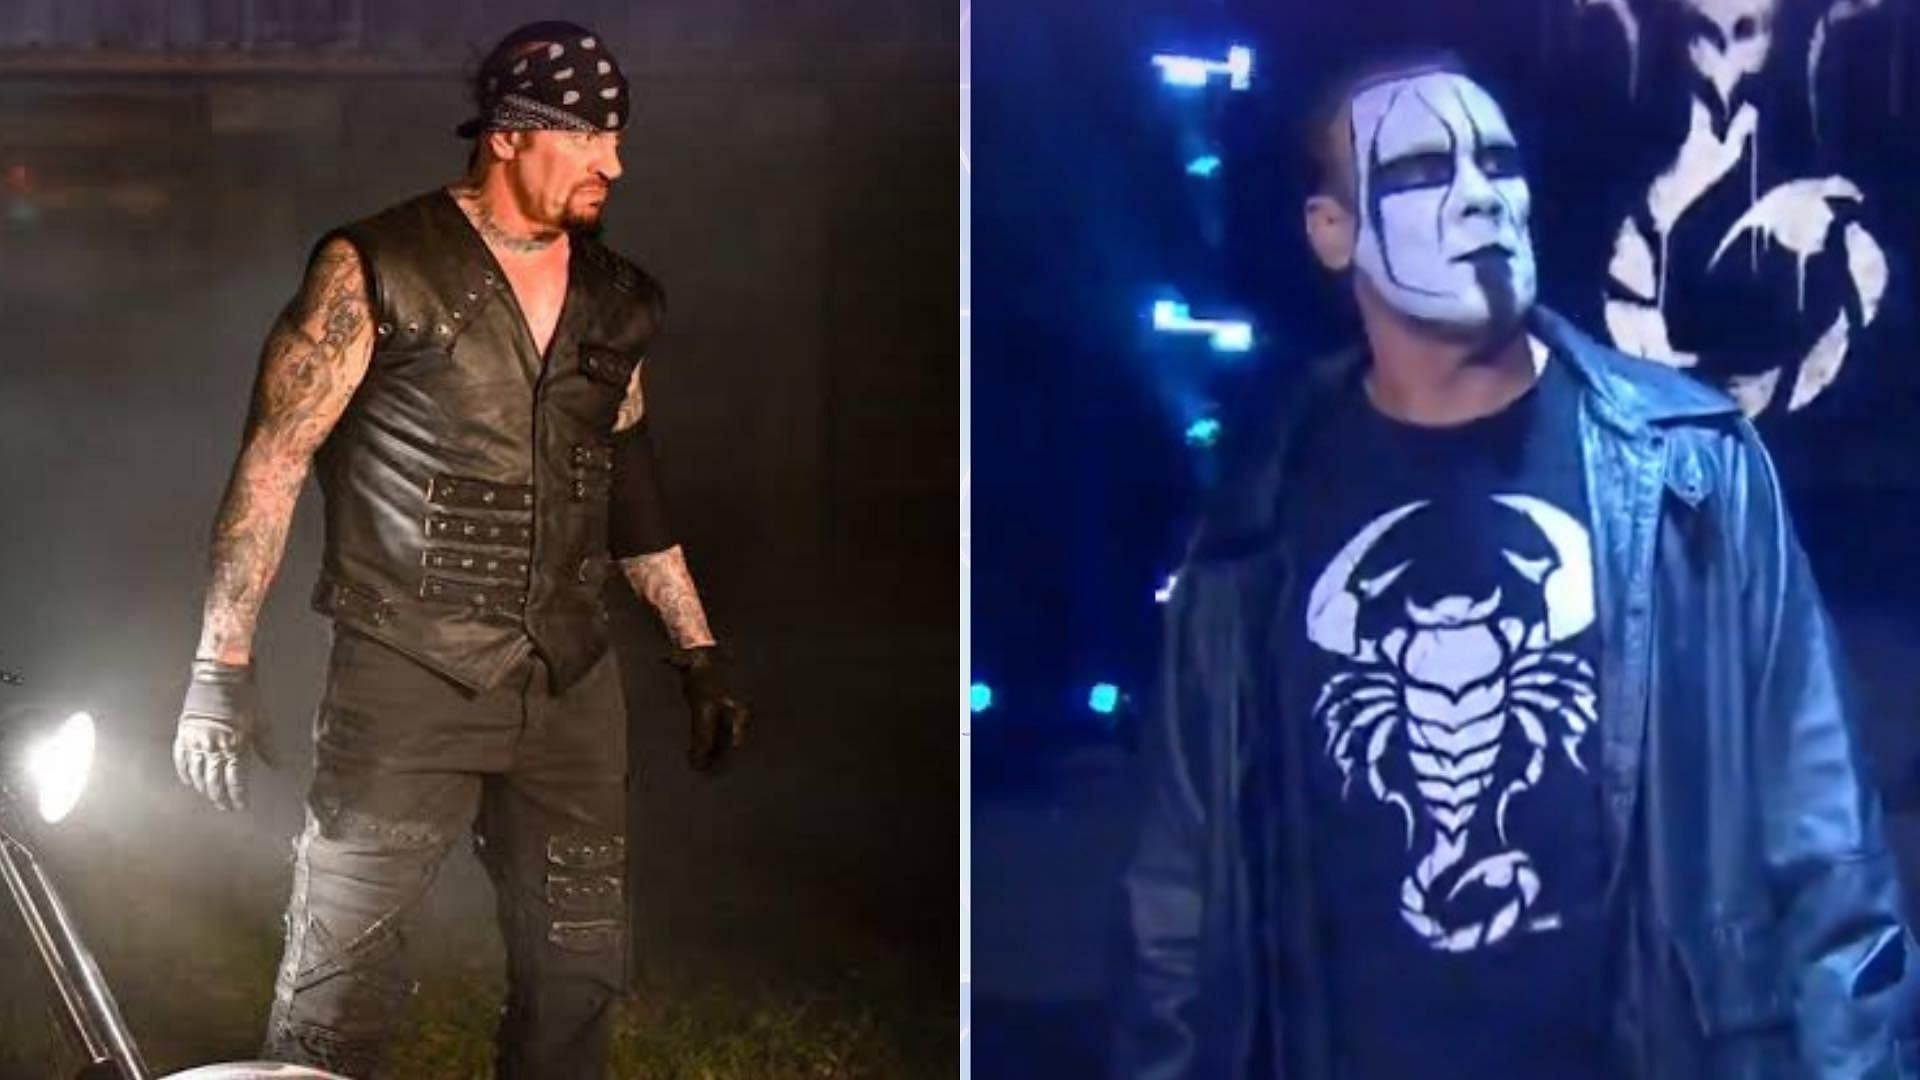 The Undertaker (right) and Sting (left)